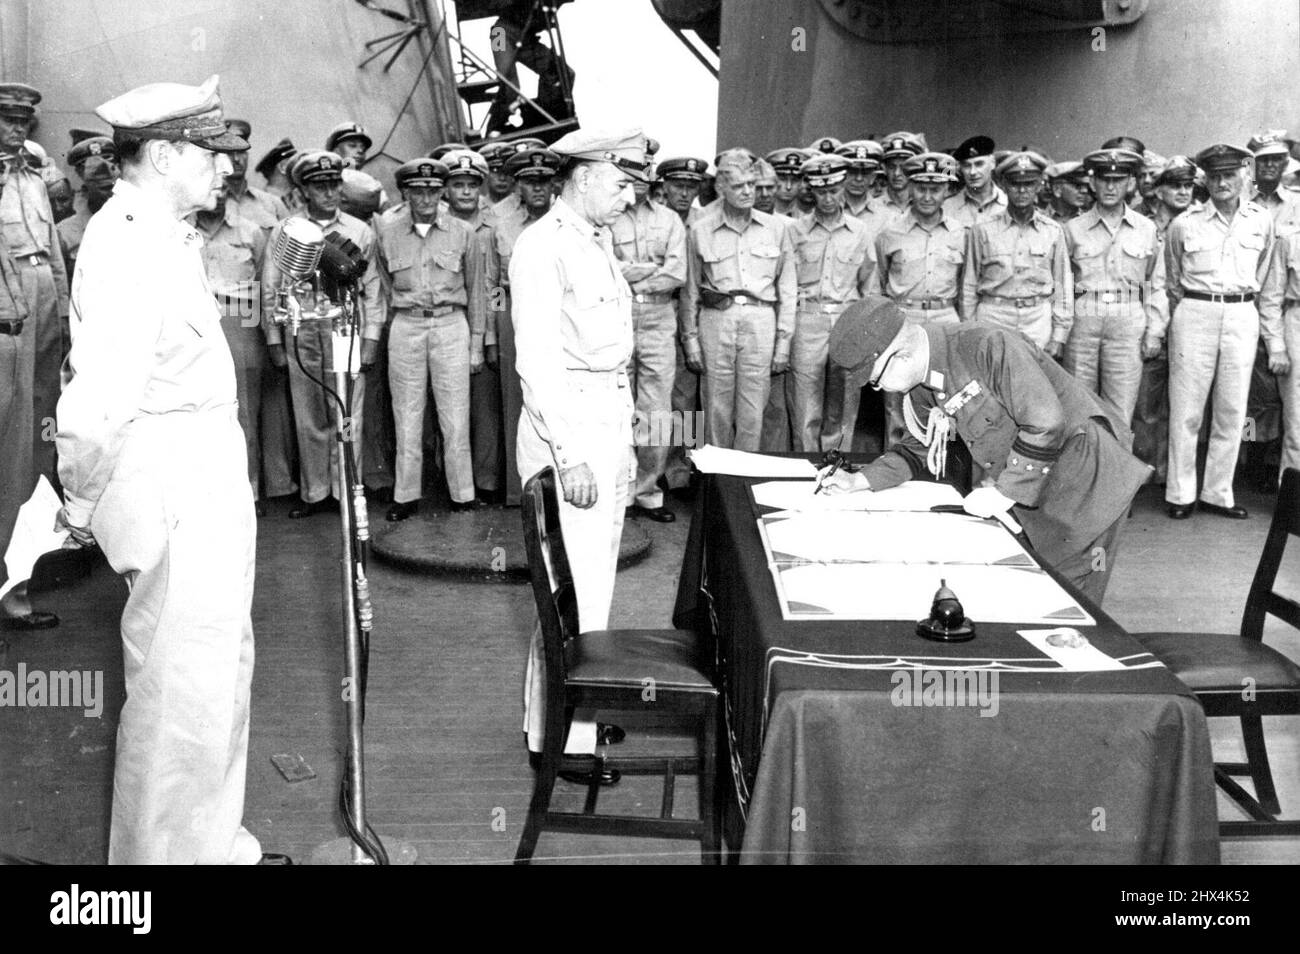 Japanese General Signs Unconditional Surrender Documents -- Japanese General Yoshijiro Umezu, Chief of the Imperial General Staff, signs Japan's surrender documents in the presence of U.S. Lieutenant General Richard K. Sutherland (center), Chief of Staff to U.S. General of the Army Douglas MacArthur (behind microphones), Supreme Allied Commander, and other Allied military officers. The capitulation ceremonies took place aboard the U.S. battleship Missouri in Tokyo Bay, south of the Japanese capital, on Sept. 1, 1945. June 9, 1945. Stock Photo